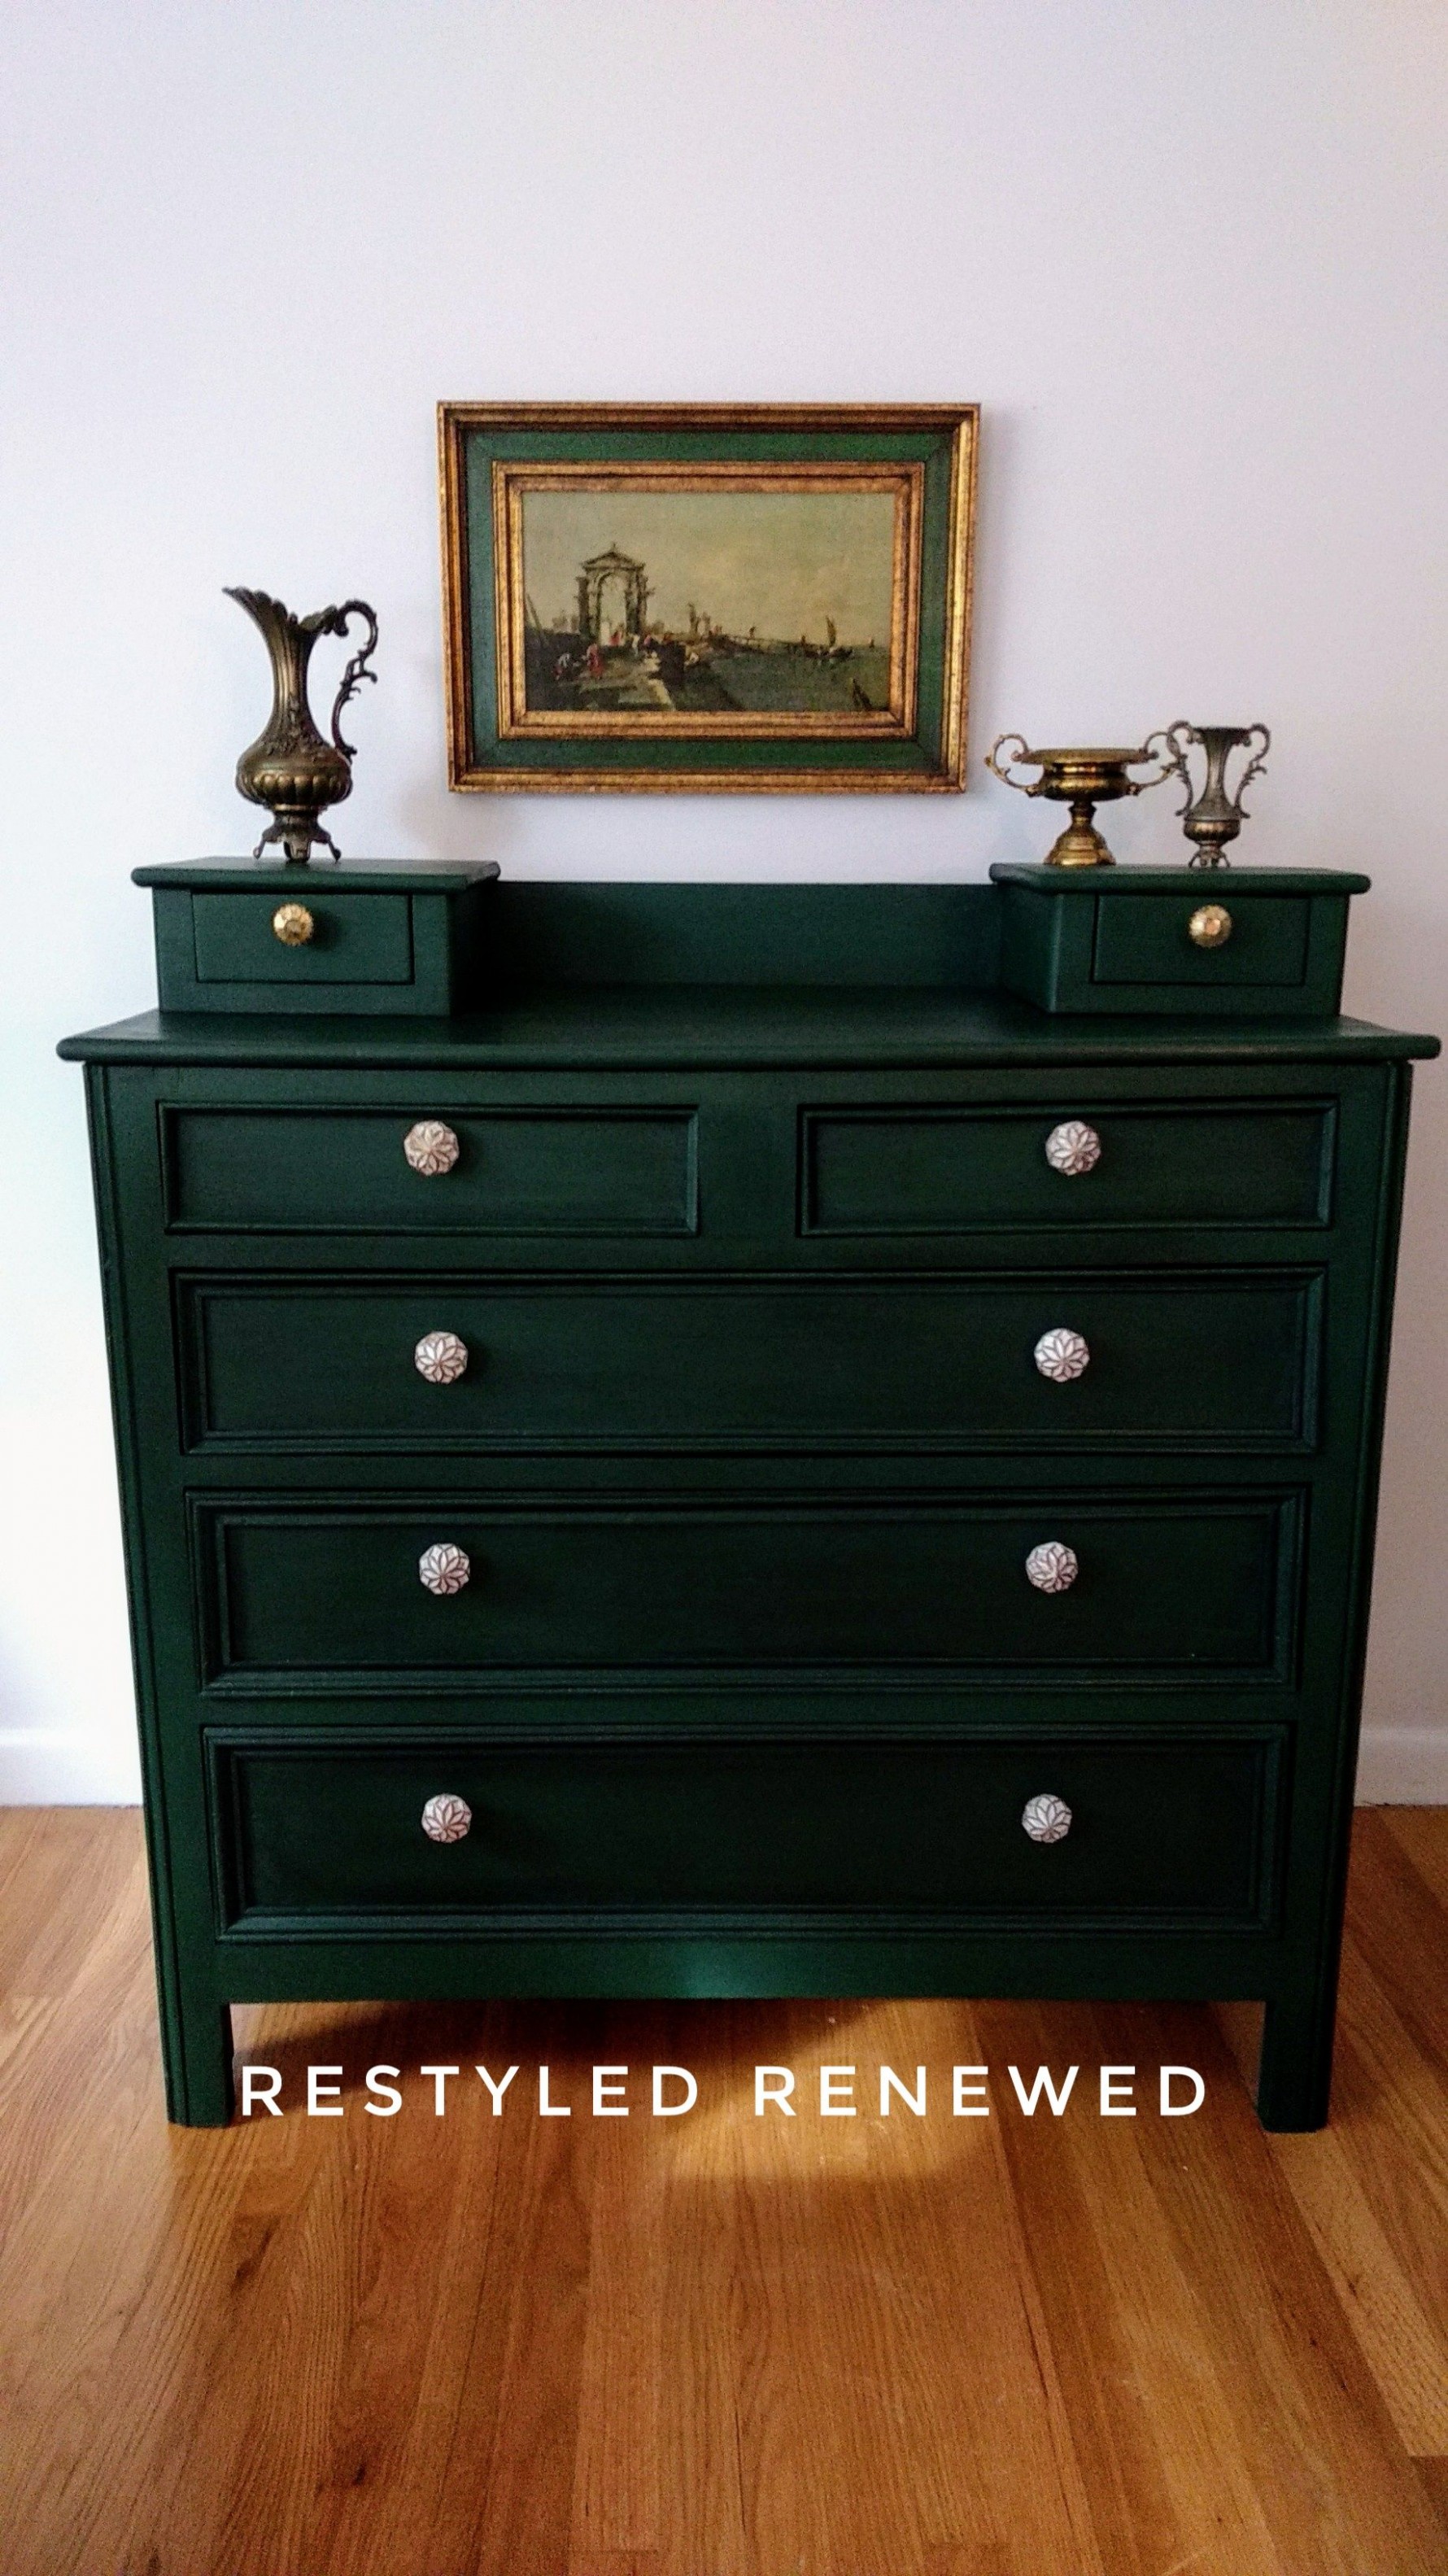 Single Post | Green Painted Furniture, Annie Sloan Painted ..